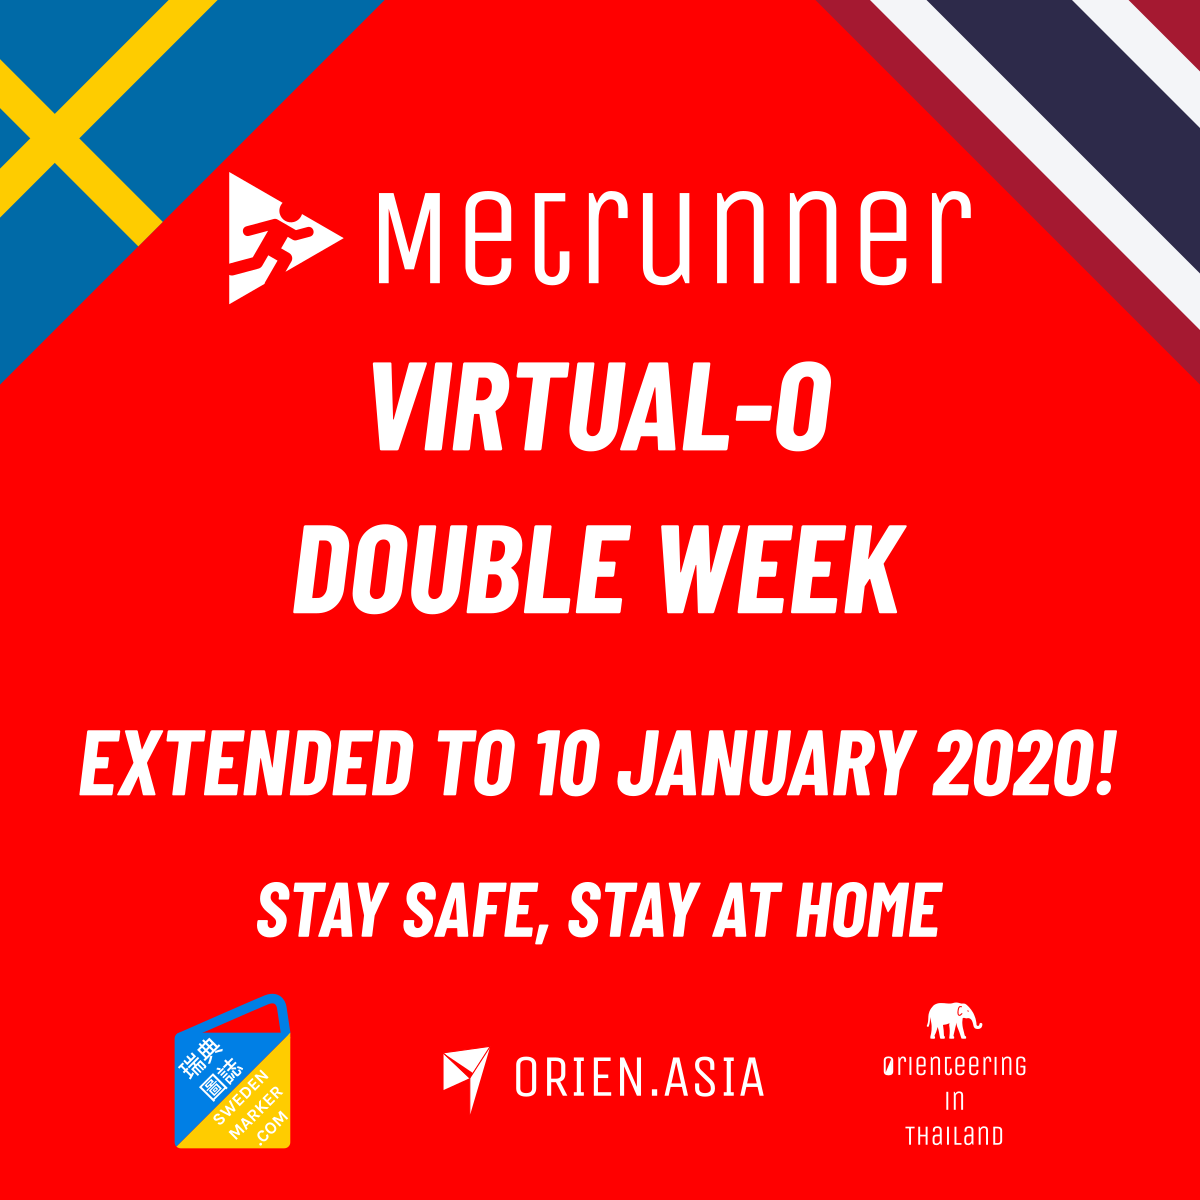 Metrunner Virtual Orienteering Contest - Sweden and Thailand - extended to 10 January 2021